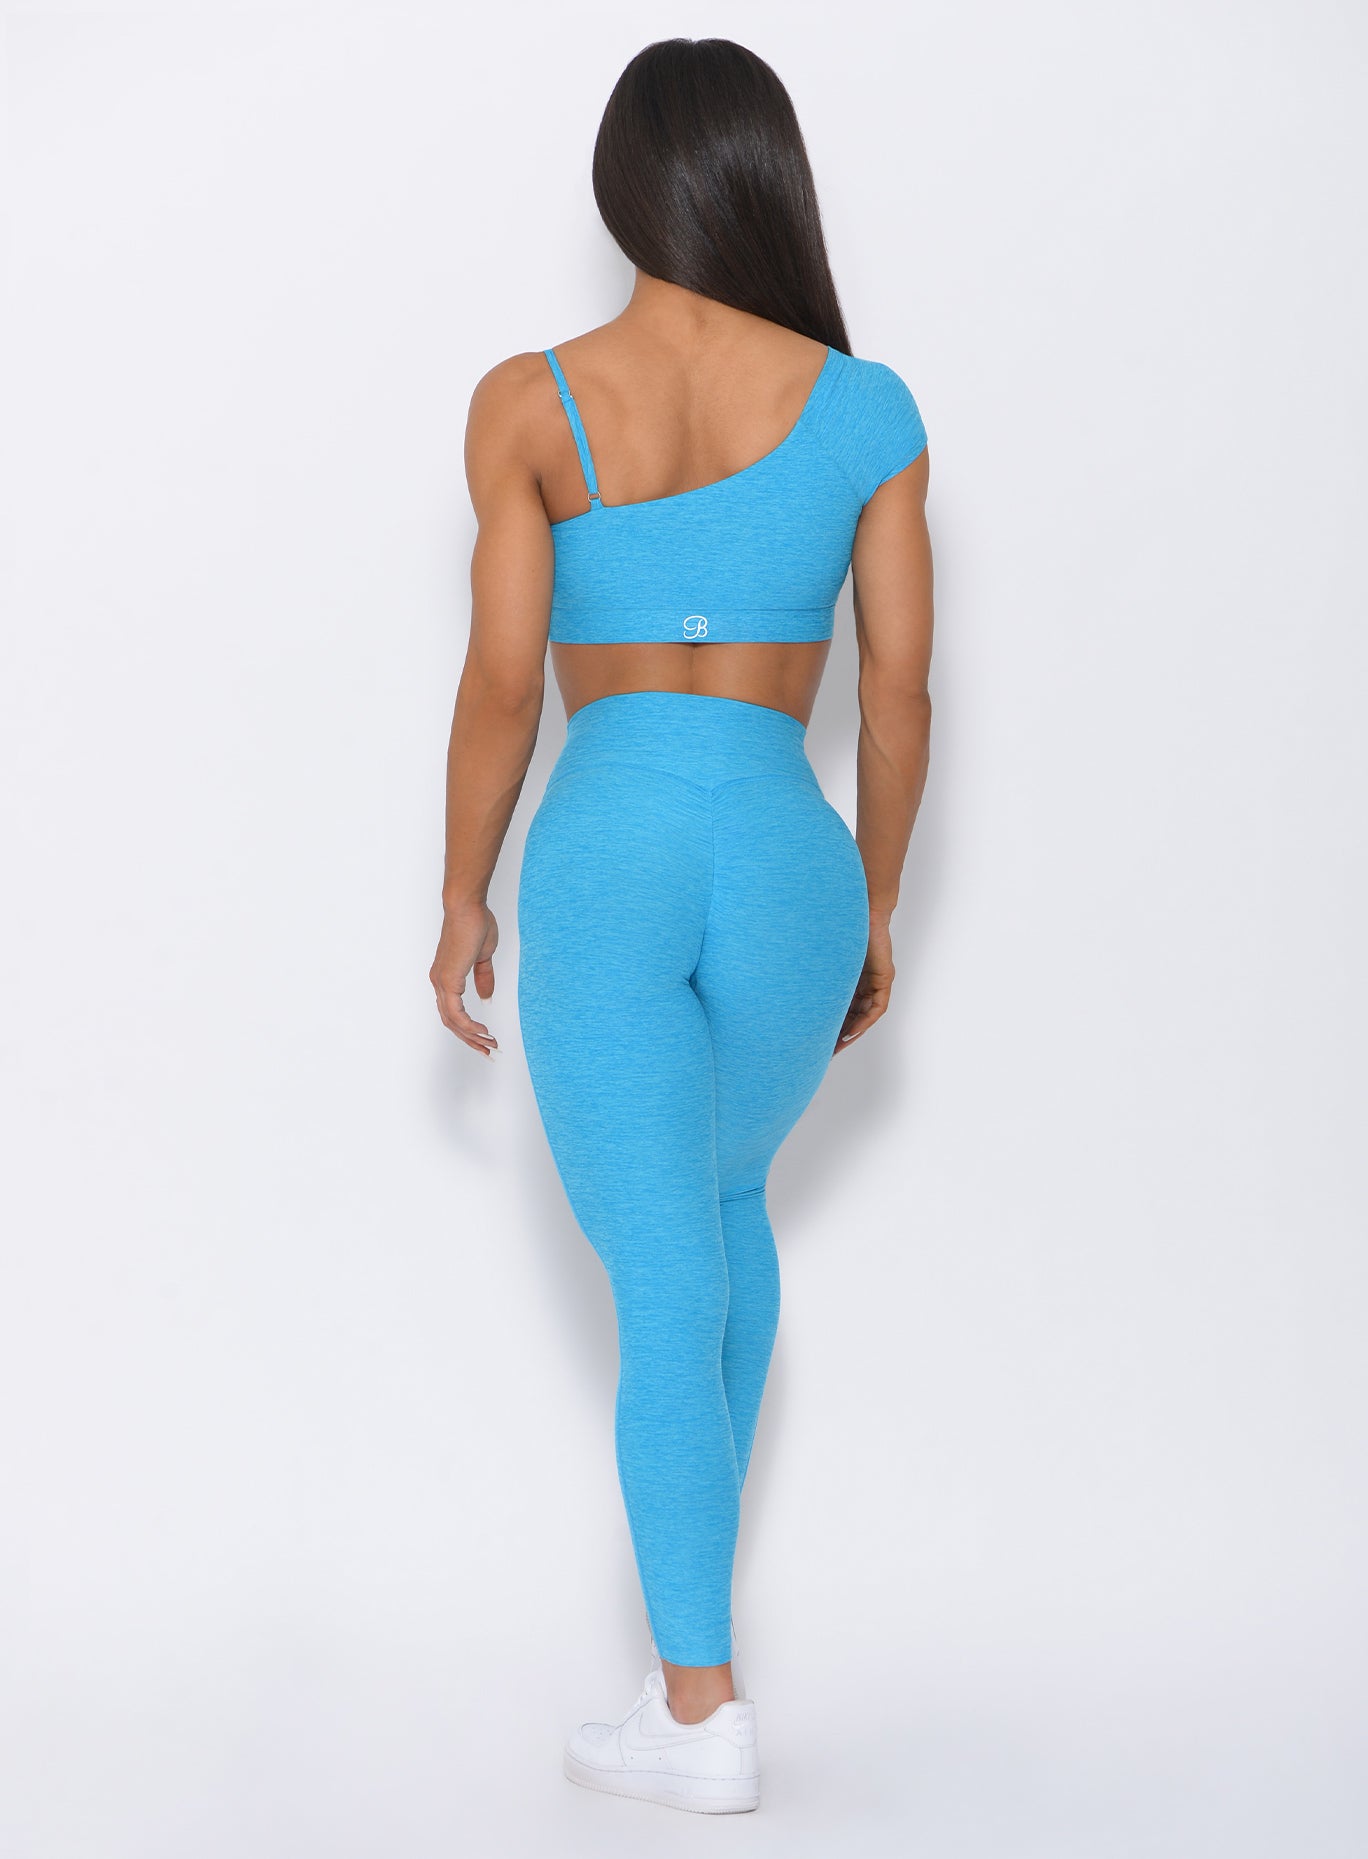 Back profile view of the model in our high waist fit leggings in icy blue and a matching bra